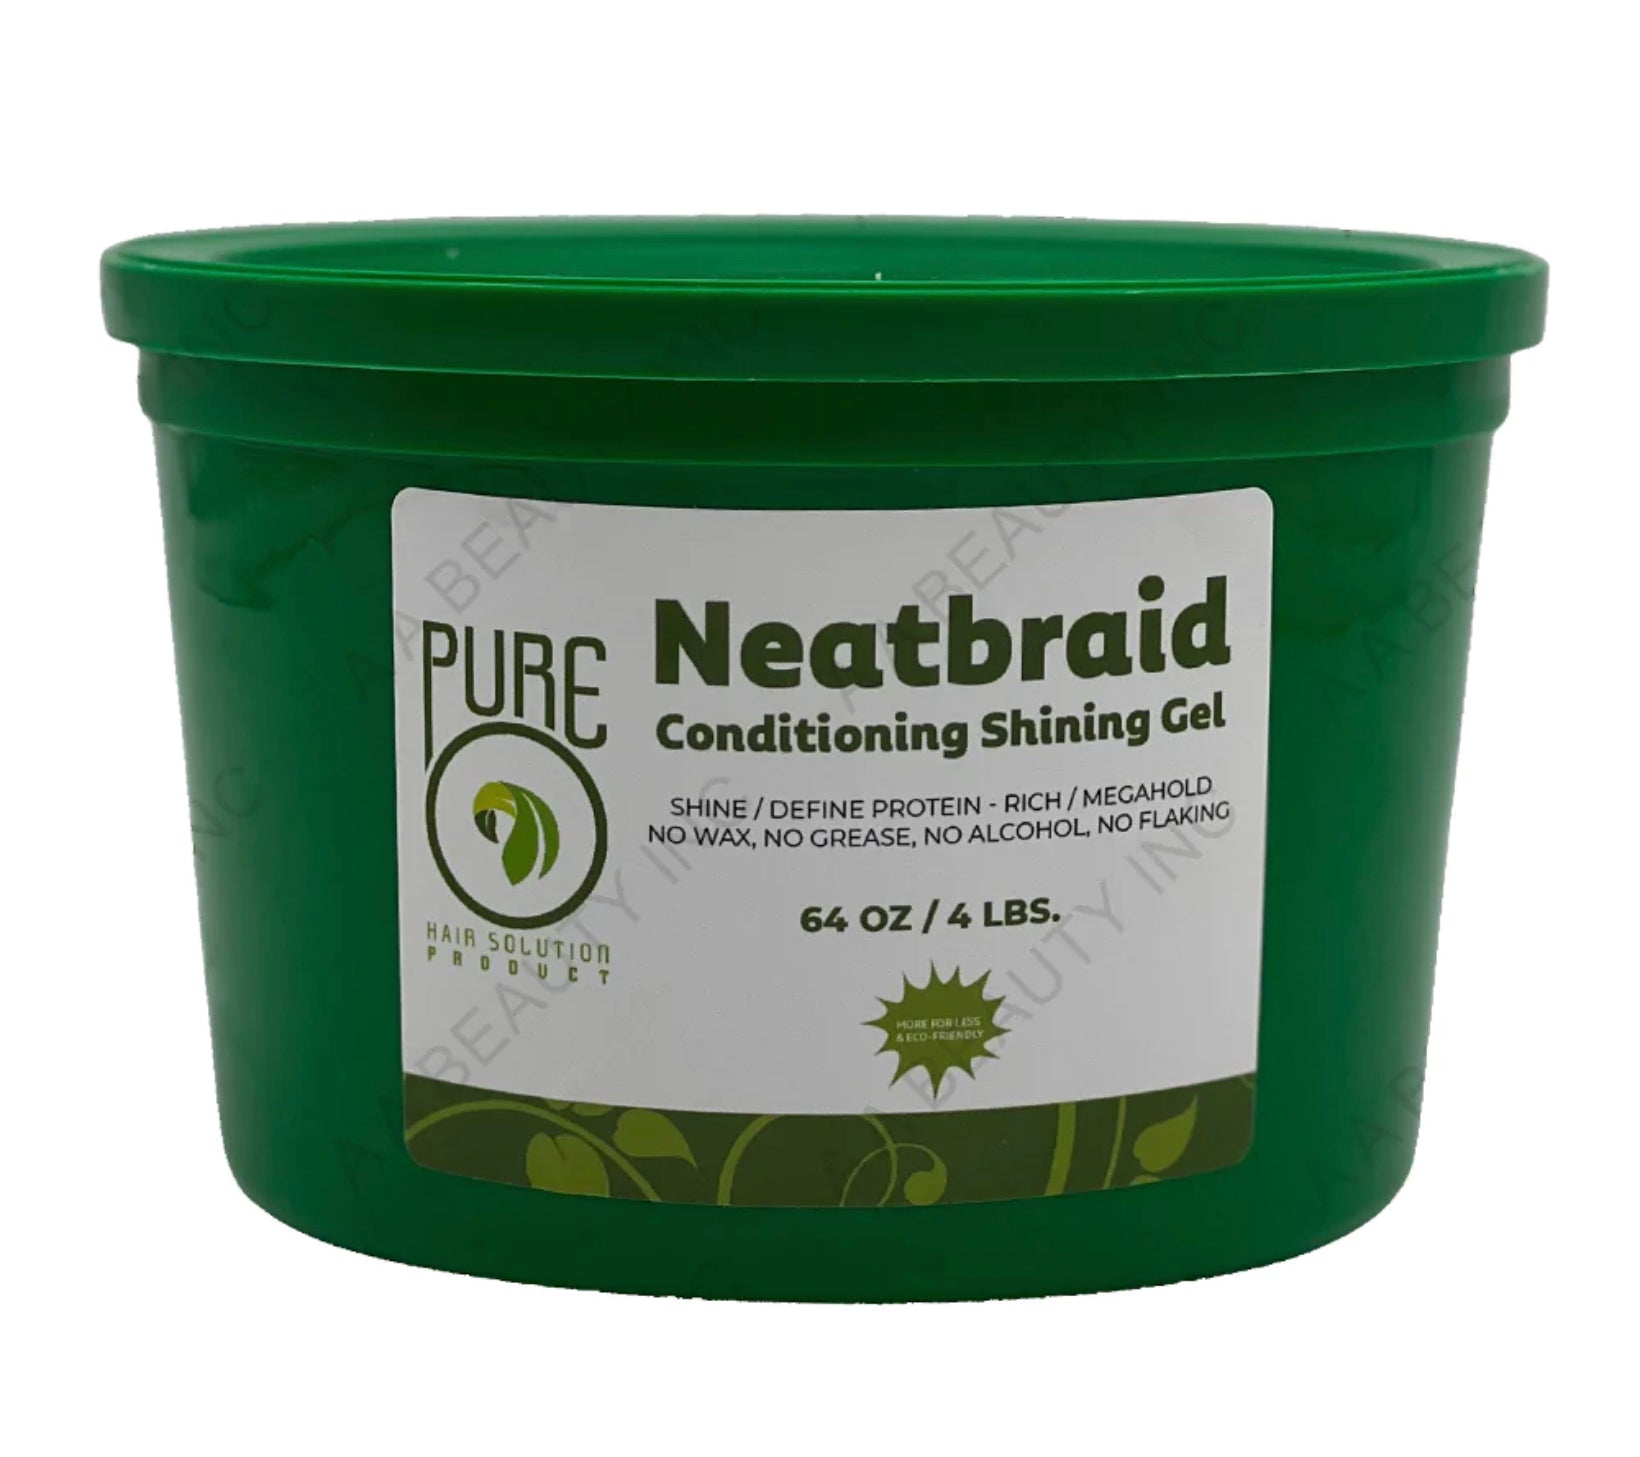 Pure Natural Neatbraid Conditioning Shining Gel, 8 oz Ingredients